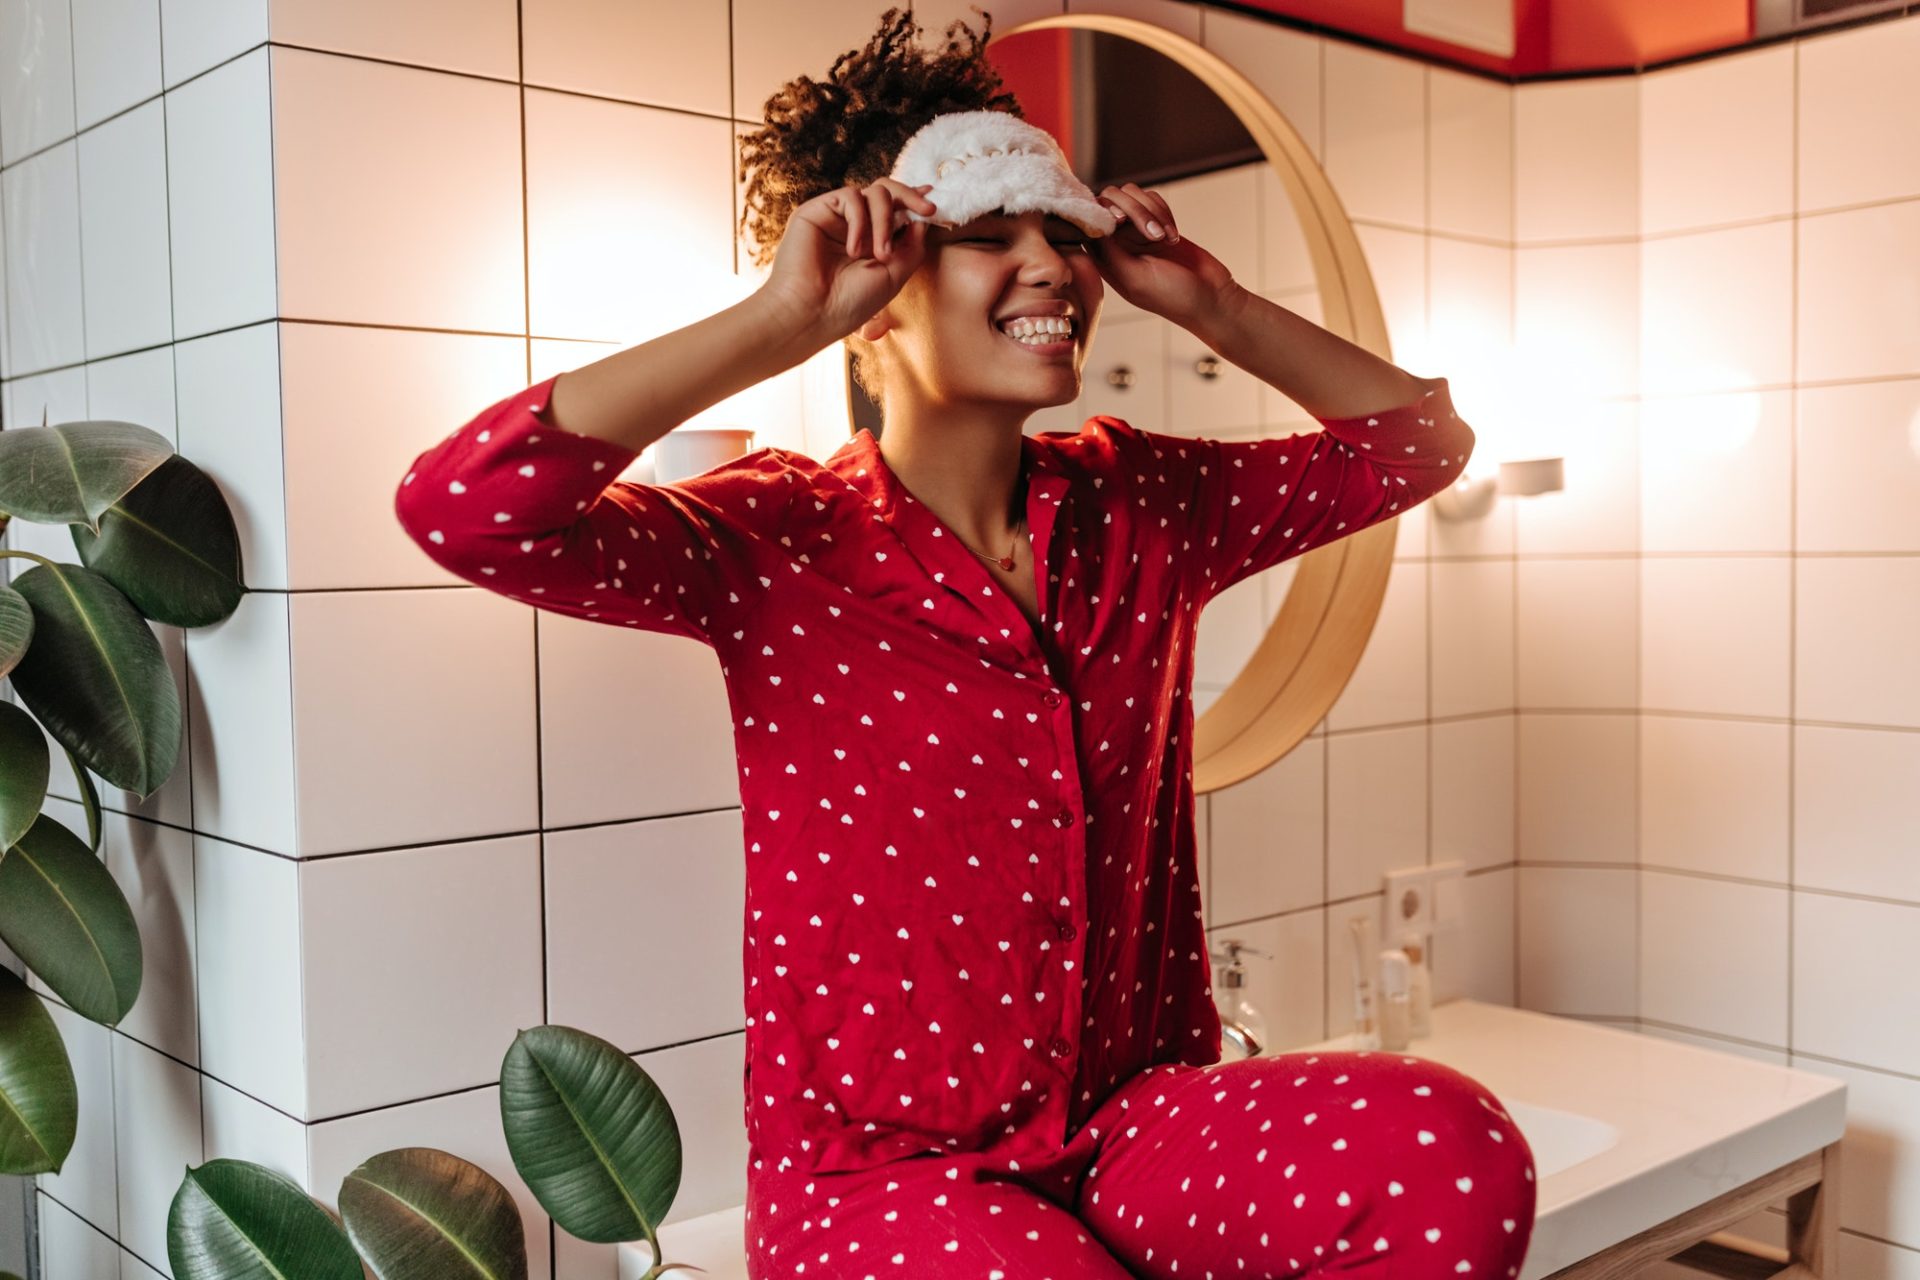 Emotional woman in pajamas laughs, takes off her sleep mask and sits near bathroom mirror